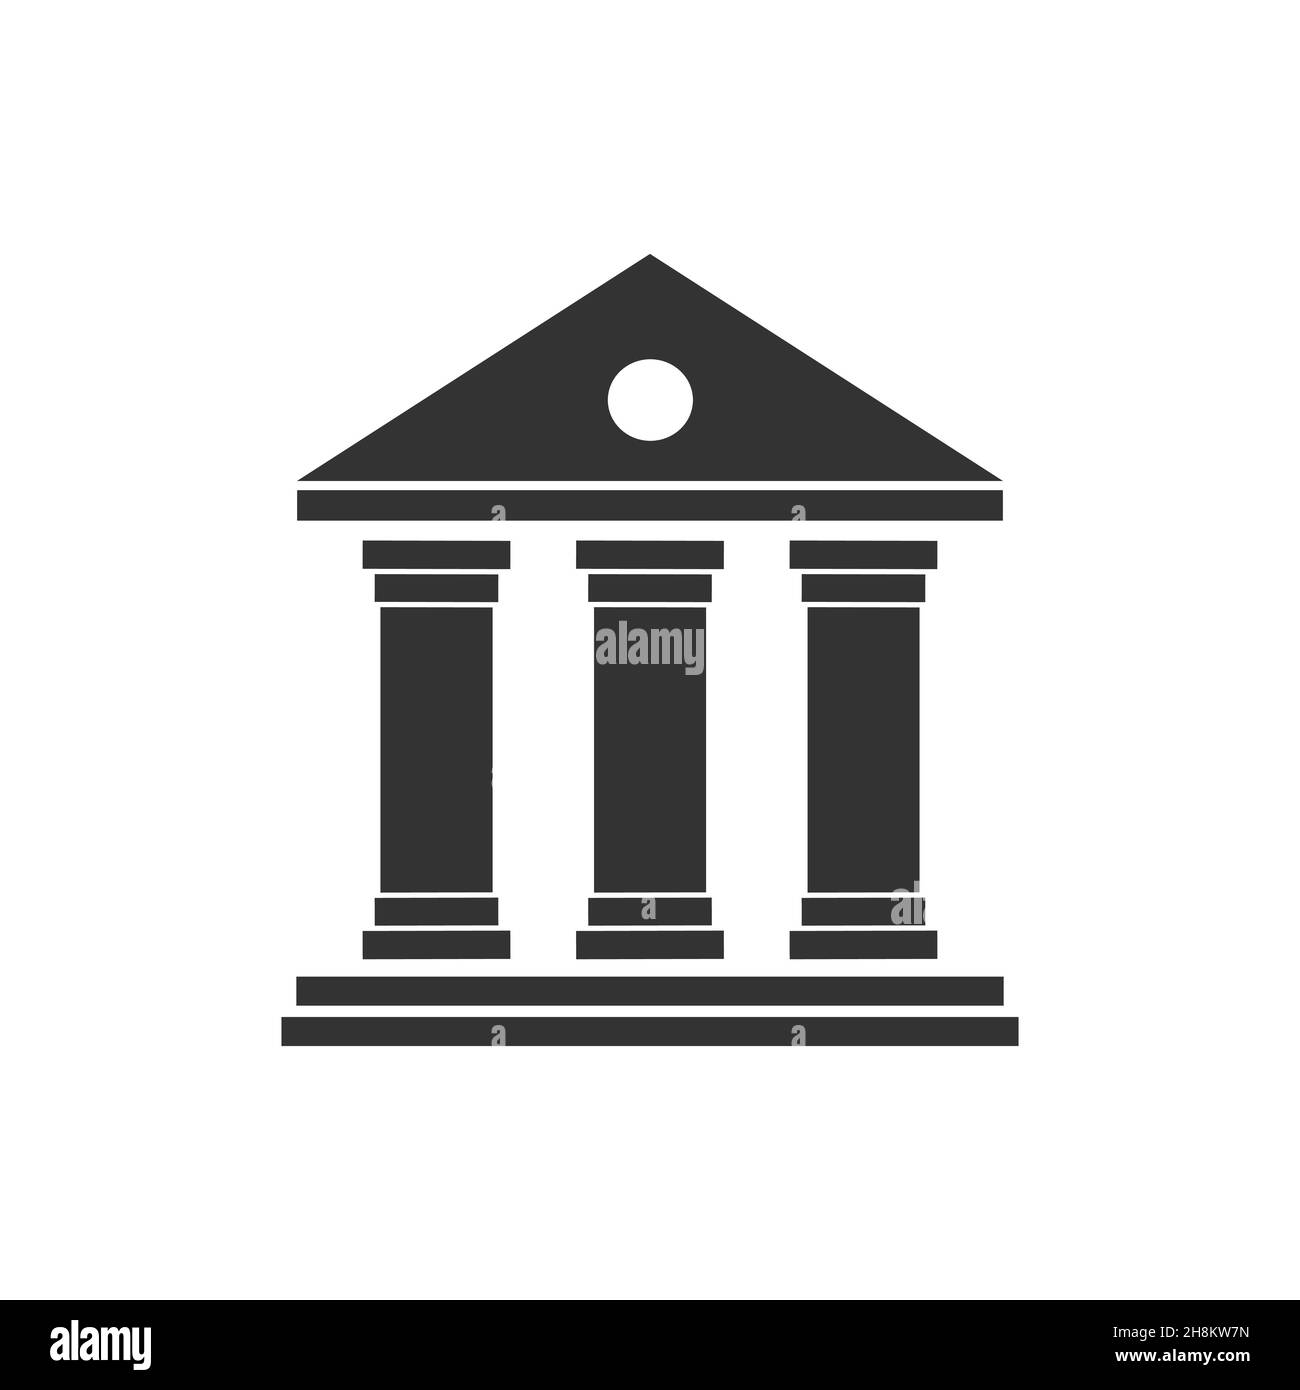 House with columns and flag icon. Building of government, embassy, official institution or establishment with flying banner. Vector Stock Vector